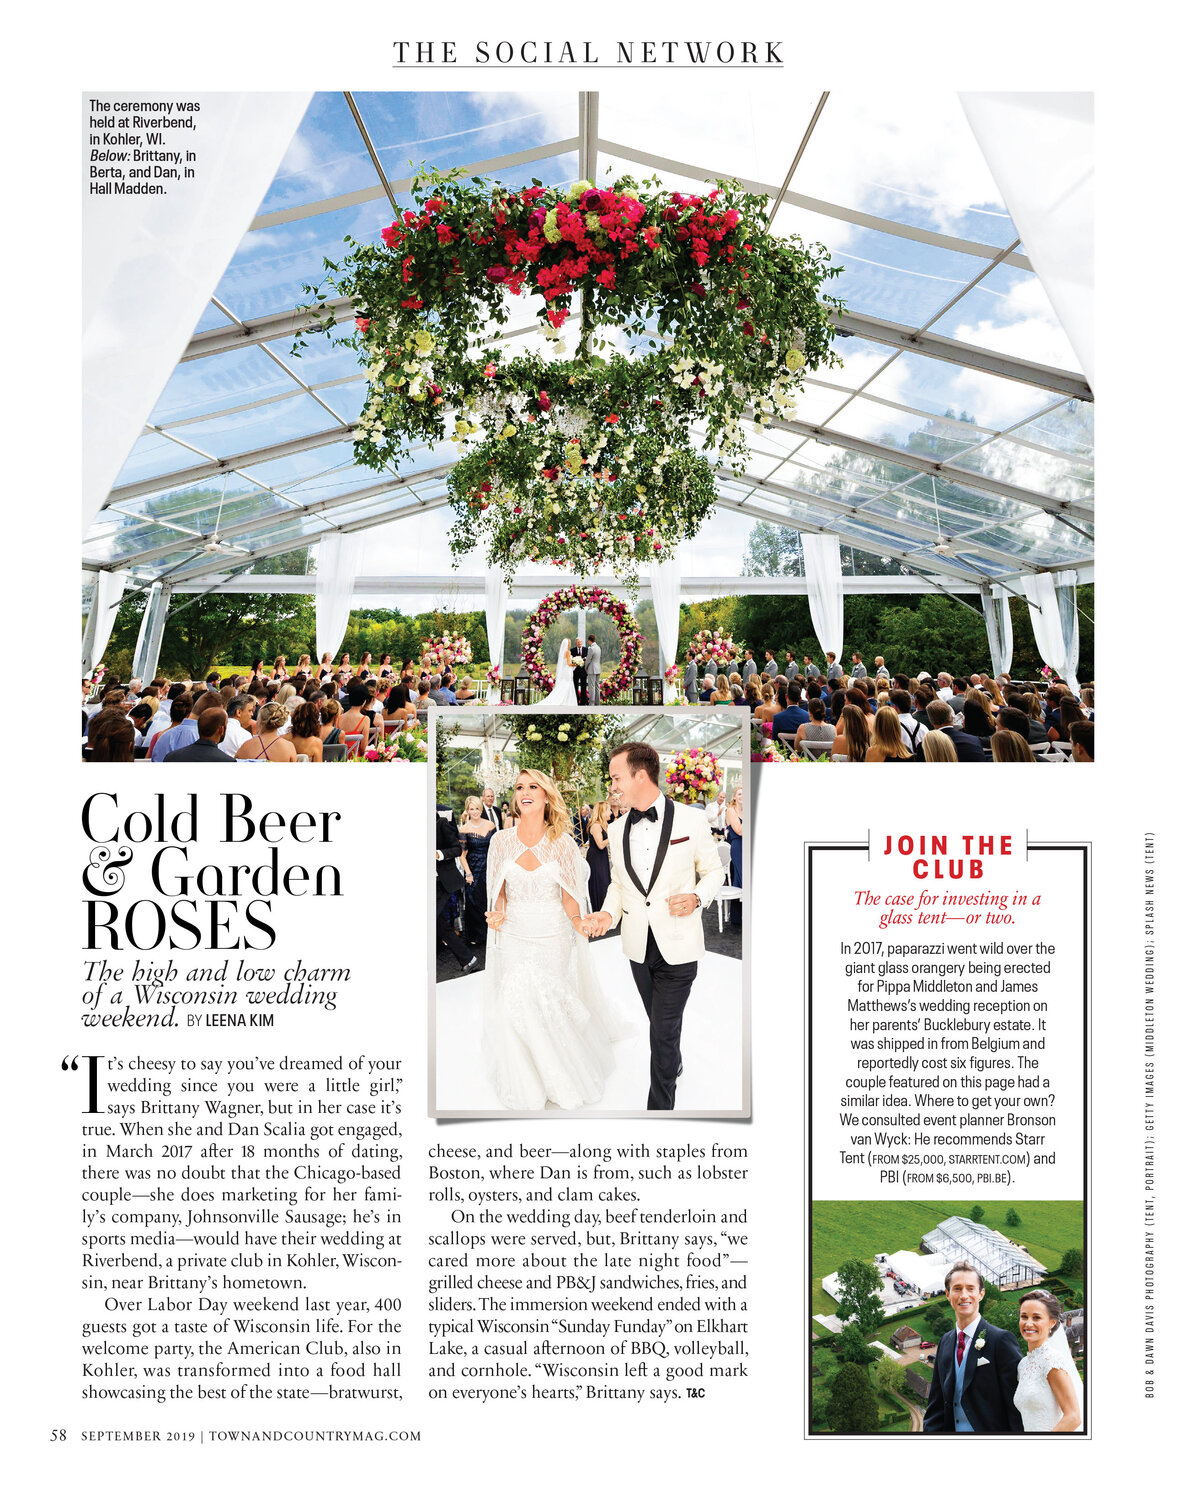 We love seeing Brittany and Dan's wedding at Riverbend in Kohler, WI in the September 2019 edition of Town&Country. This incredible wedding was designed by the exceptionally talented, Vince Hart of Kehoe Designs. He knocked this out of the park with his extraordinary team! And who doesn't LOVE when Zac Brown Band is the surprise entertainment? So fun  Click here for a list of vendors.